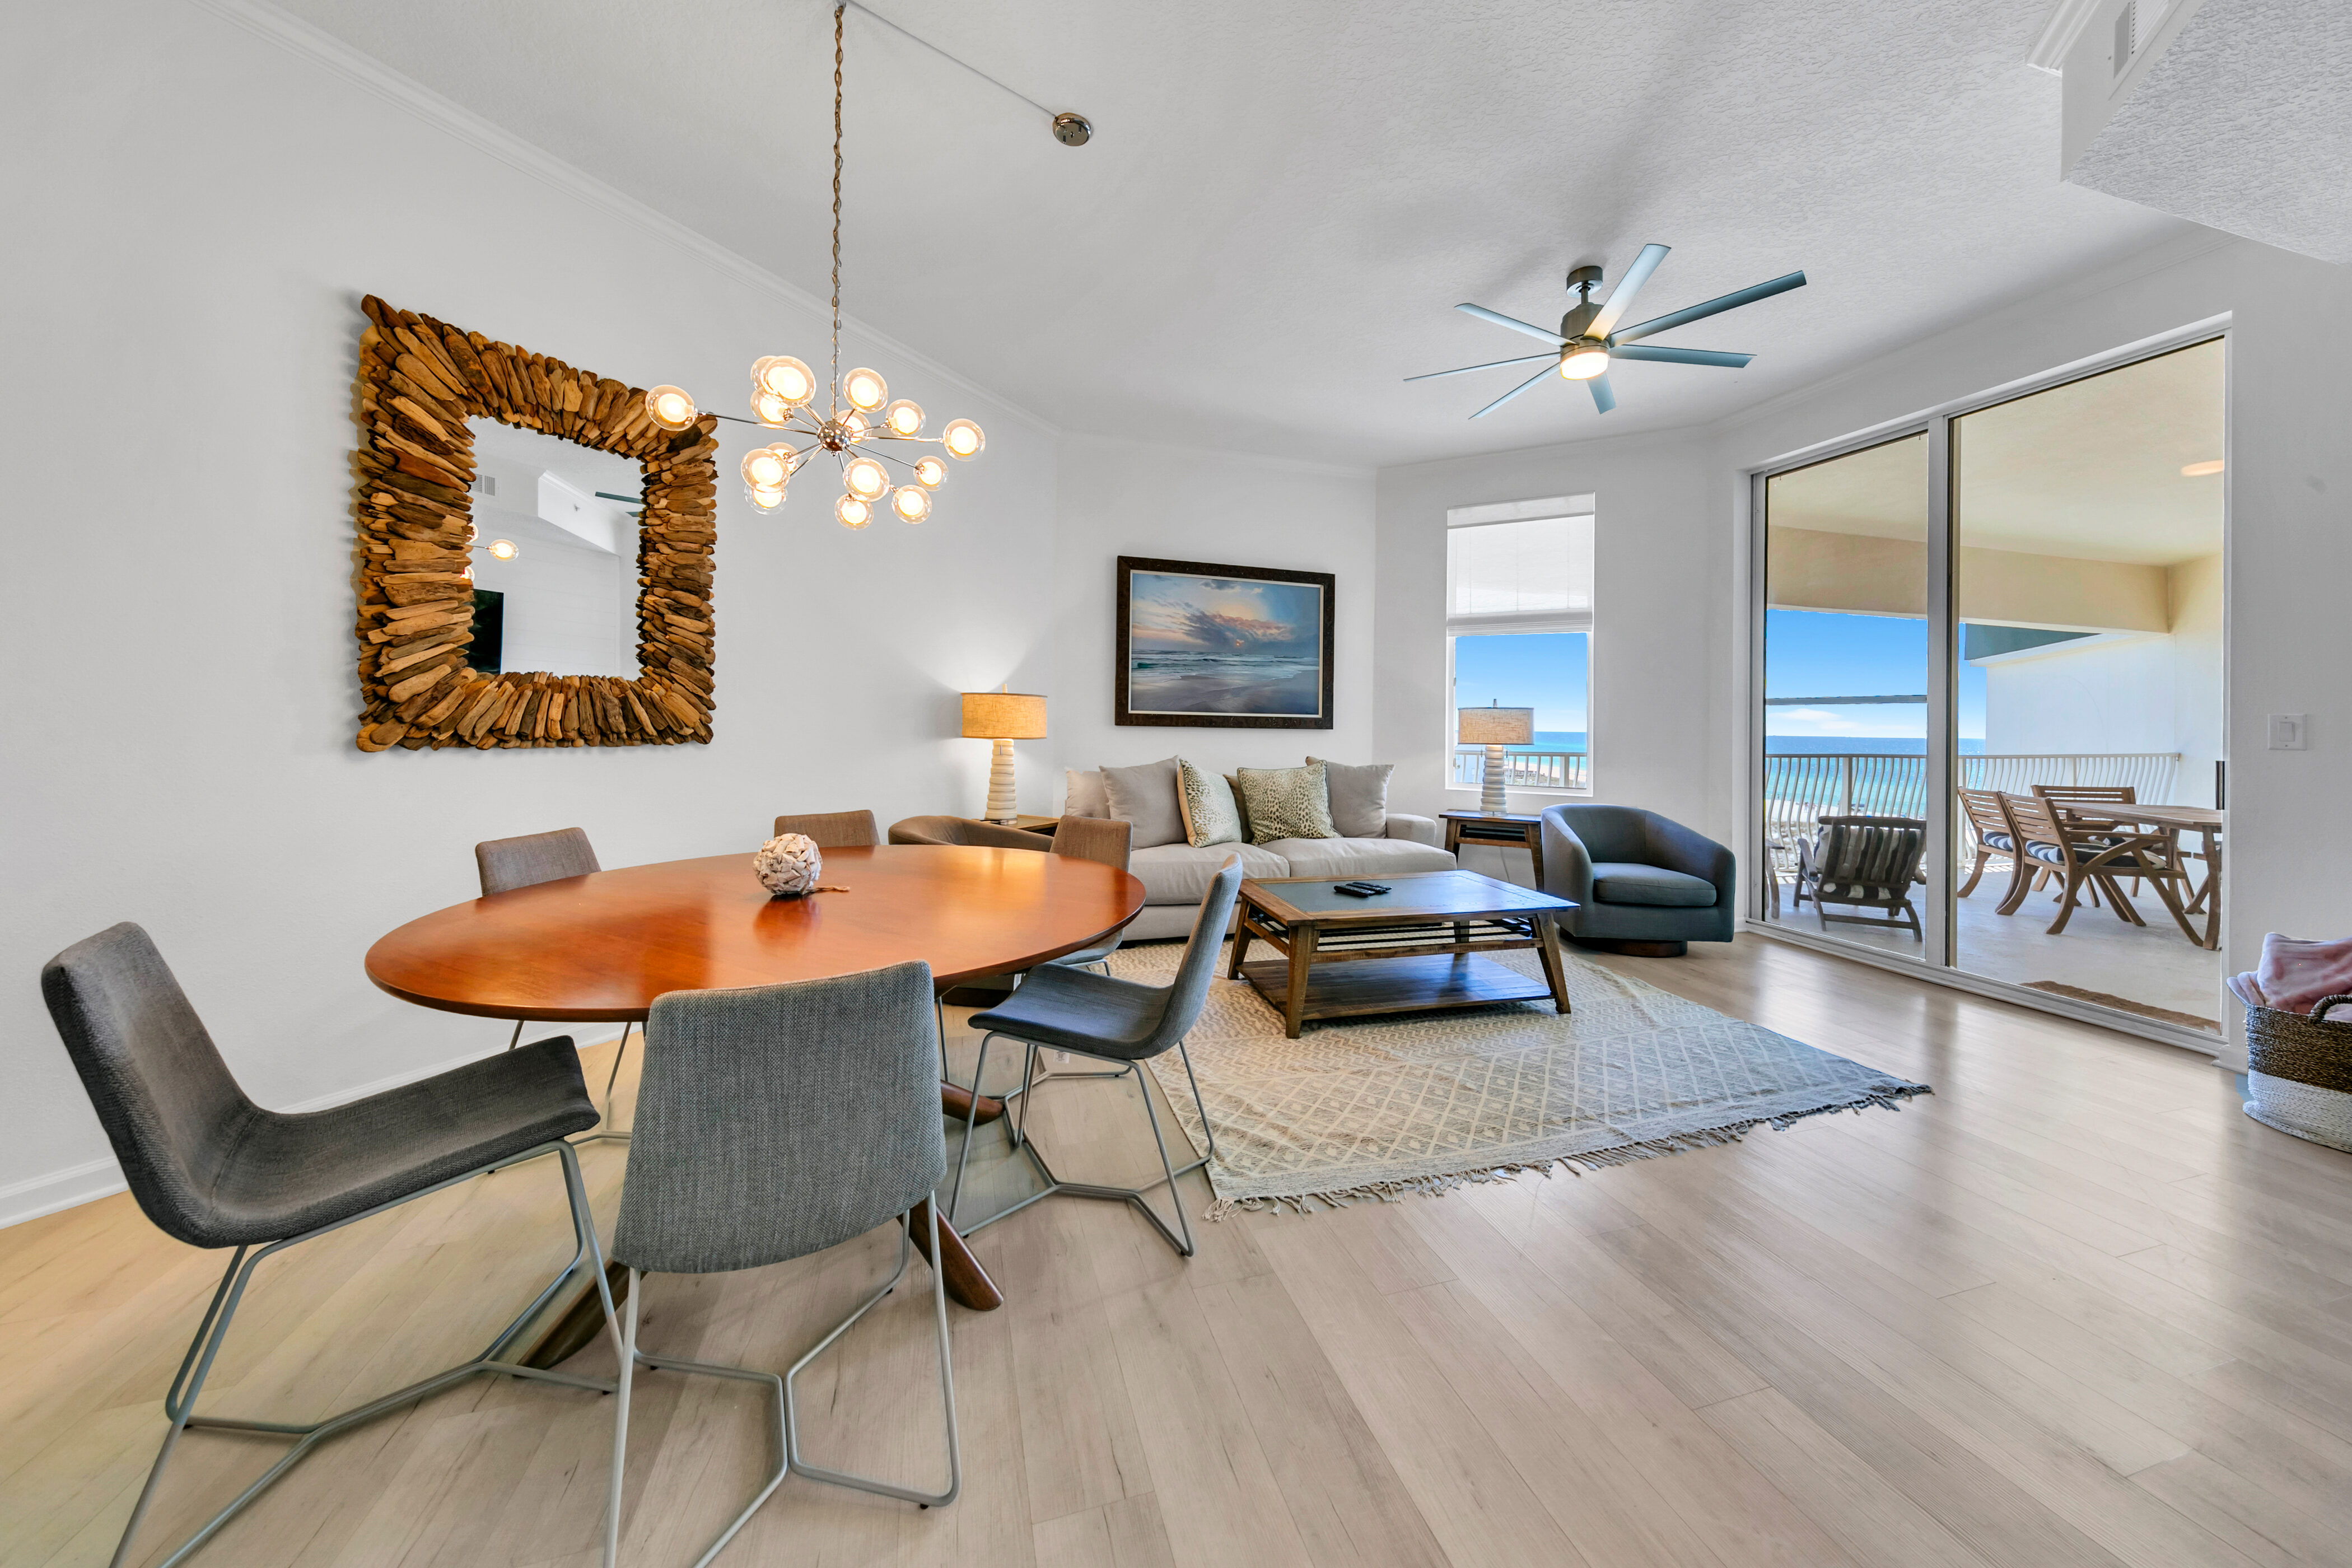 Completely Remodeled Gulf-View Condo With Bunk Room